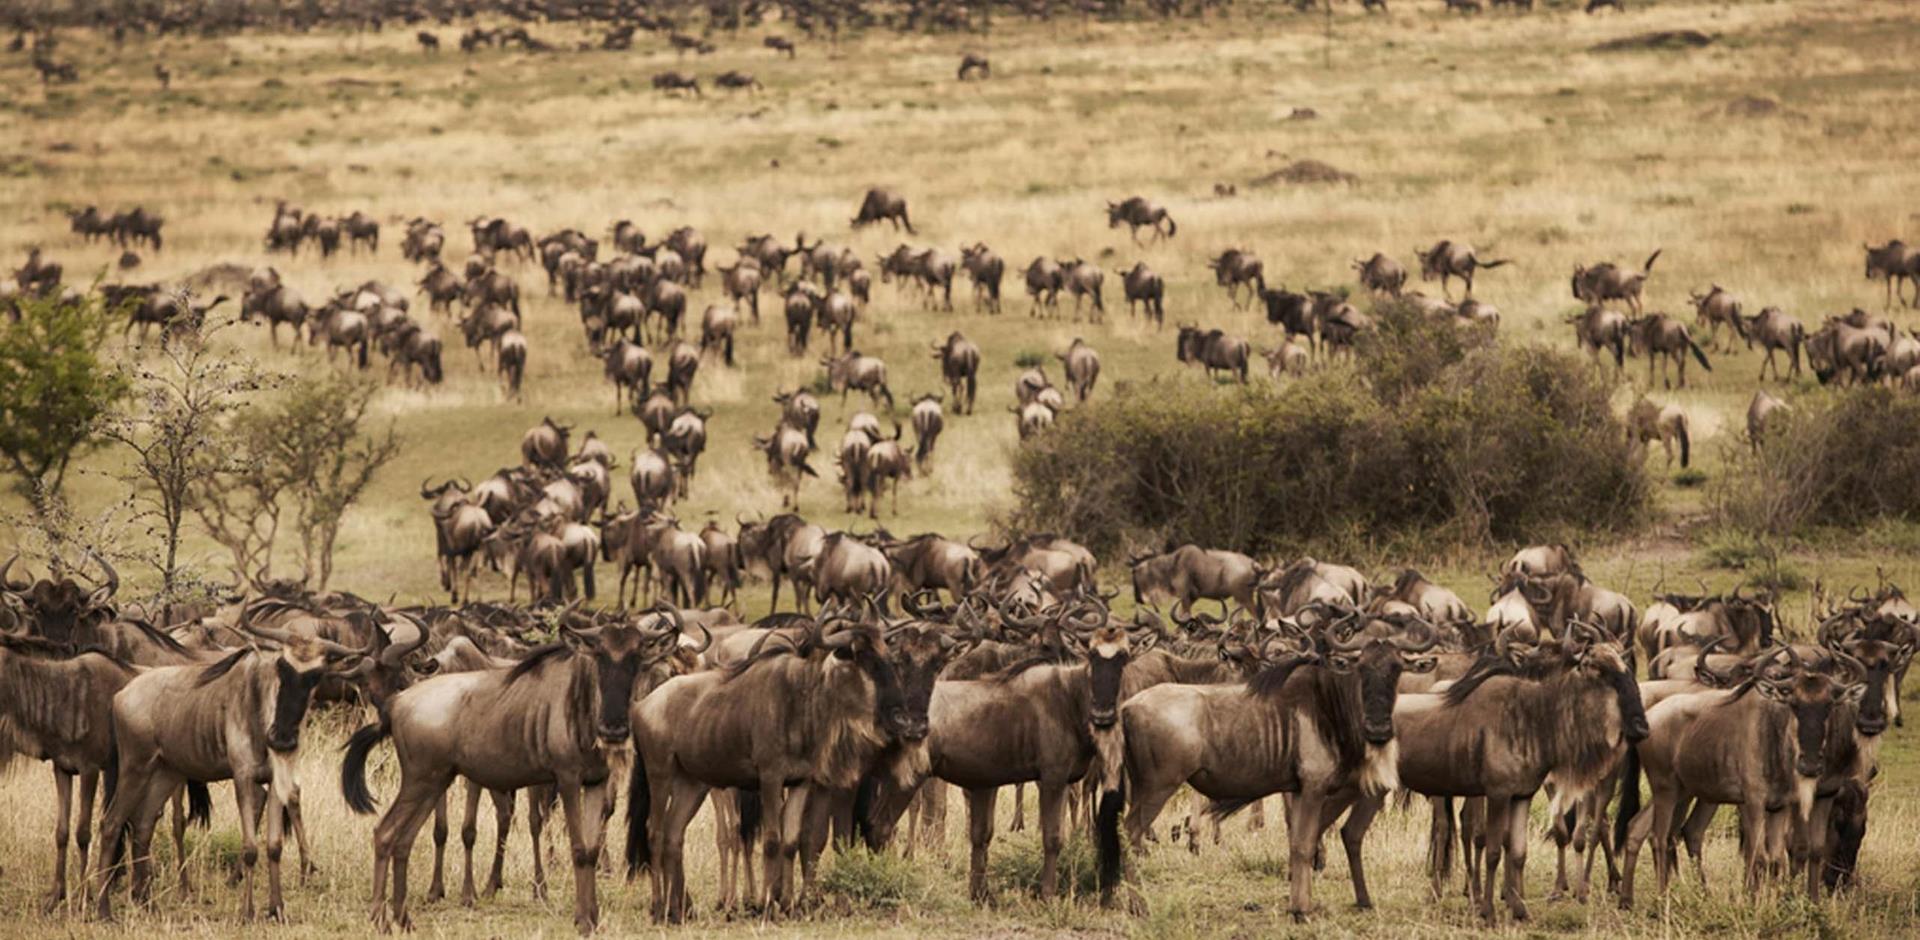 View the Great Migration